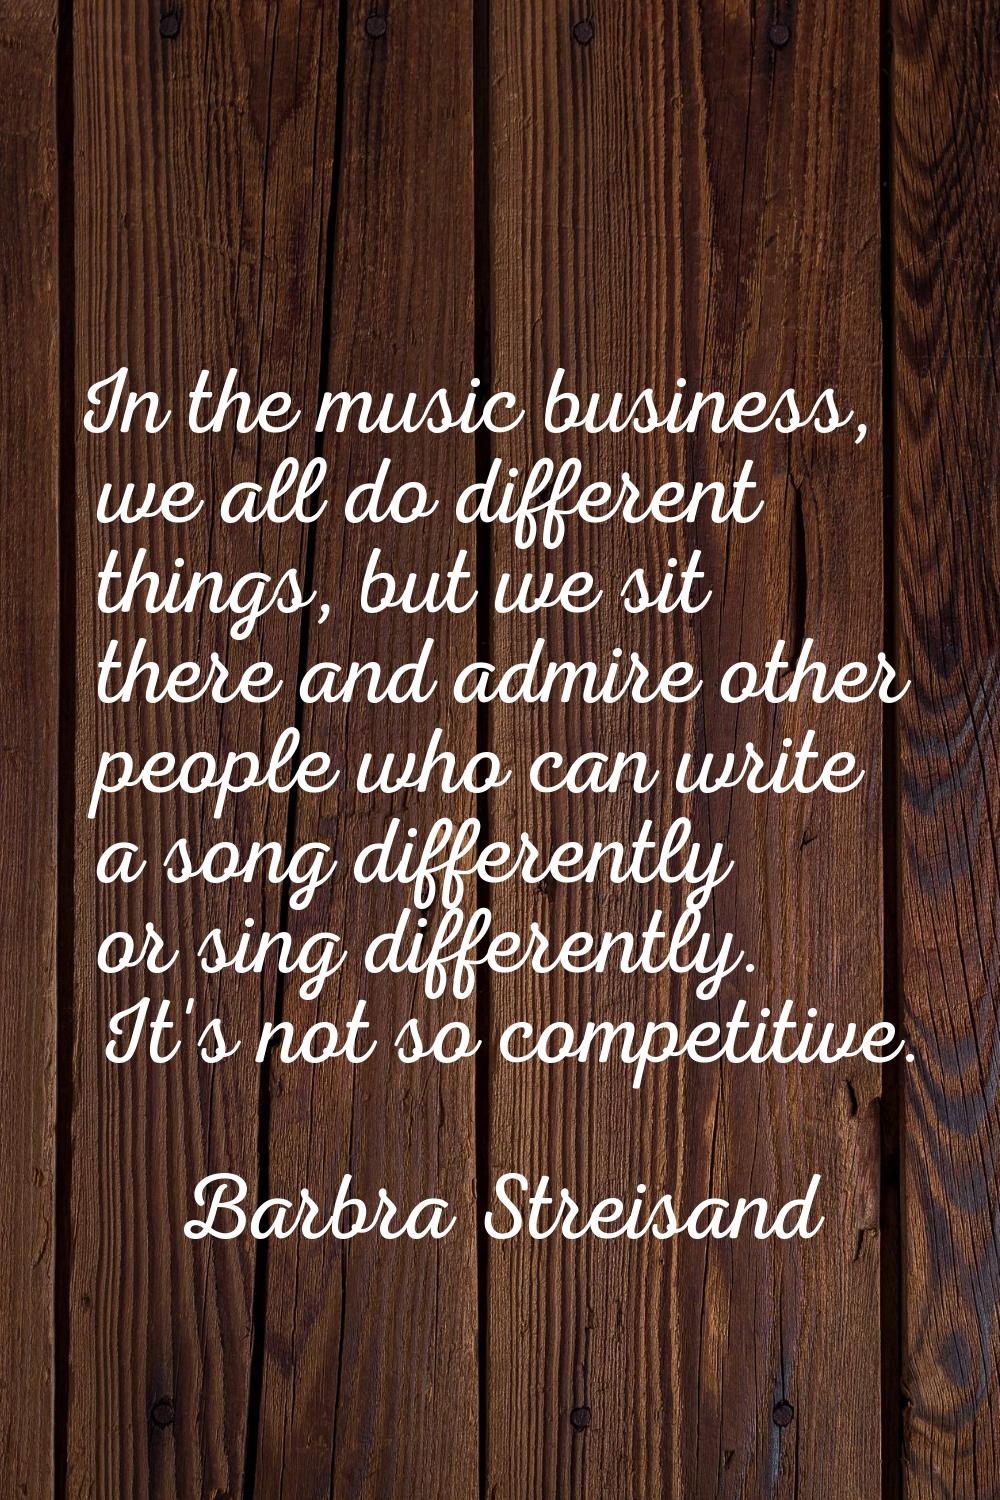 In the music business, we all do different things, but we sit there and admire other people who can